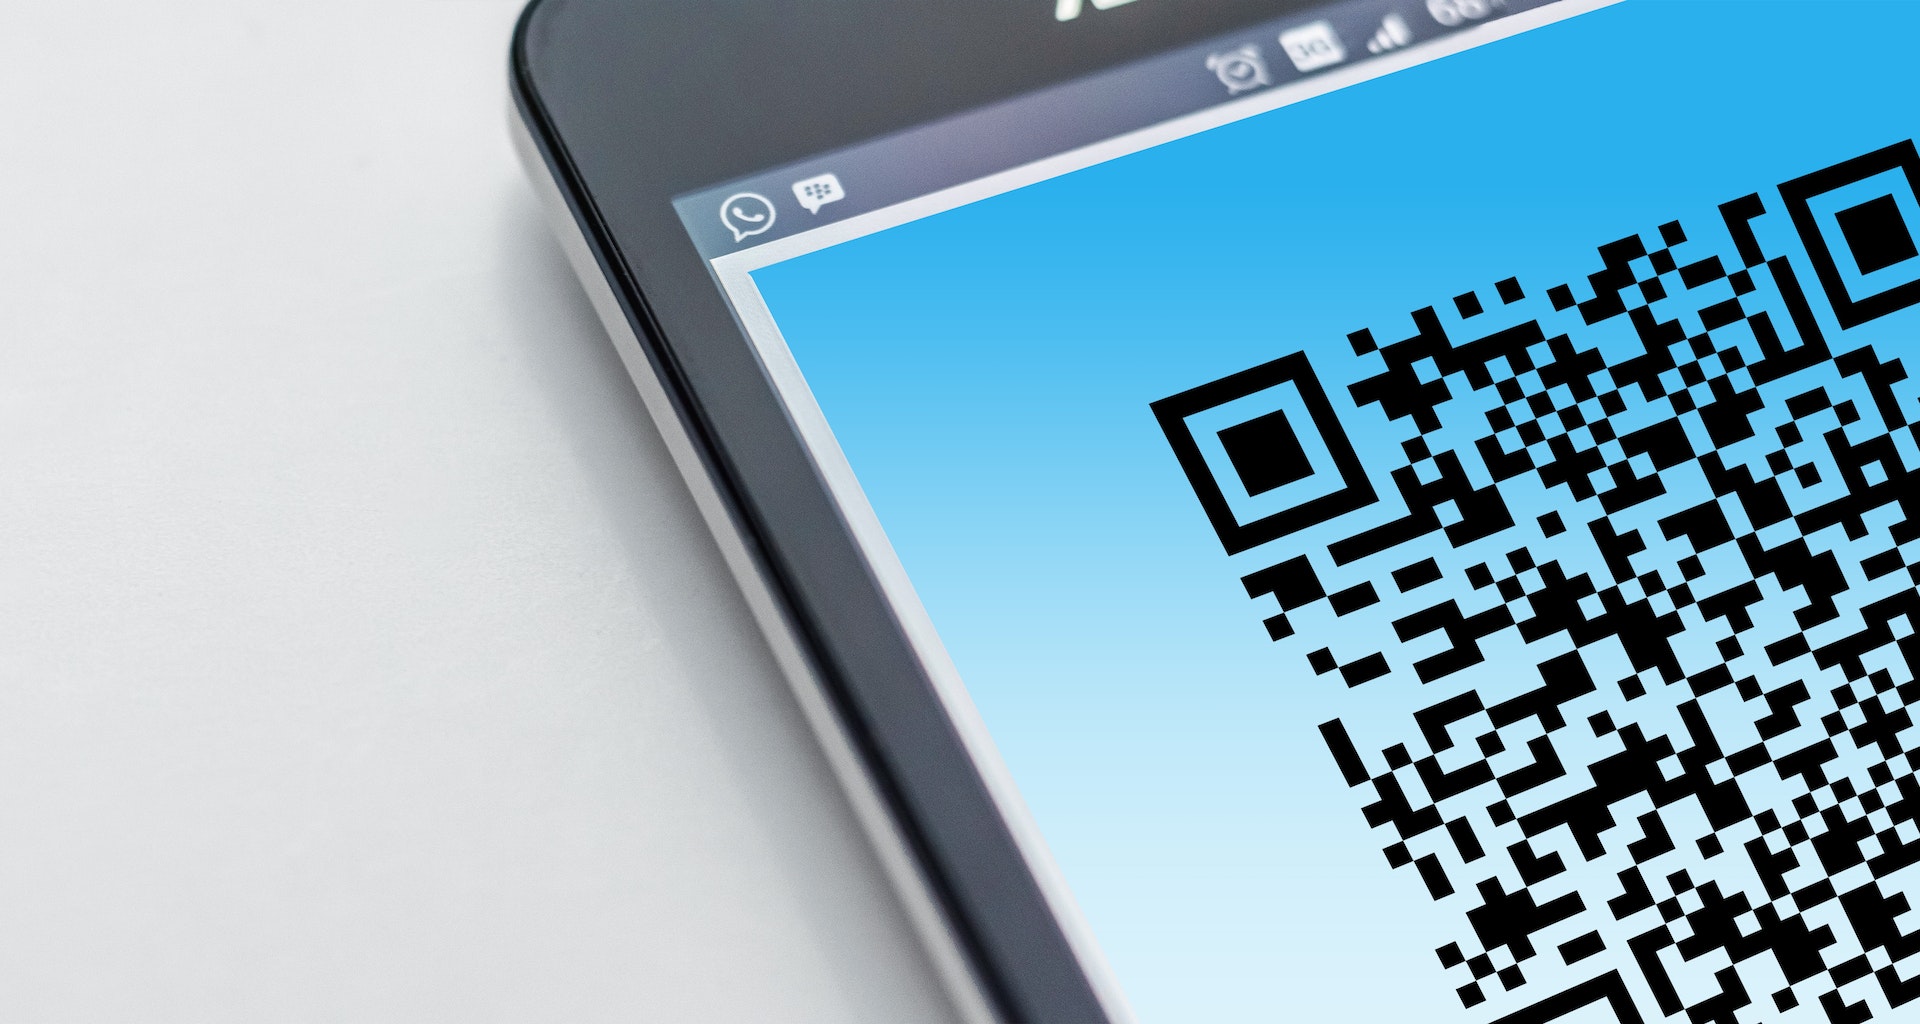 How to Scan QR codes on Your iPhone or Android